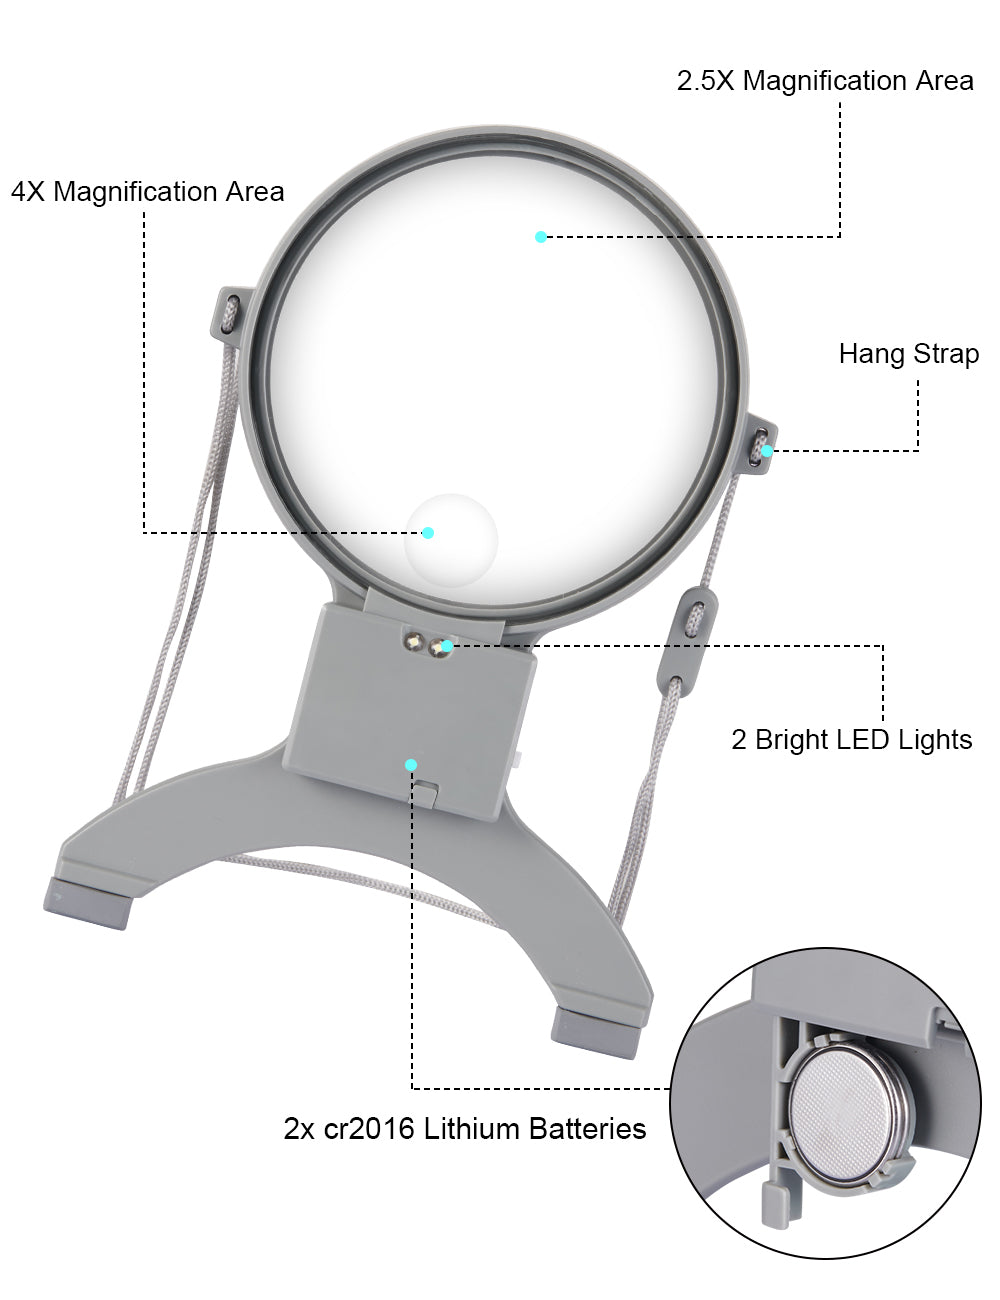 EasyLifeCare LED Magnifier - Neck Wear Visual Aid Illuminated Magnifying Glass